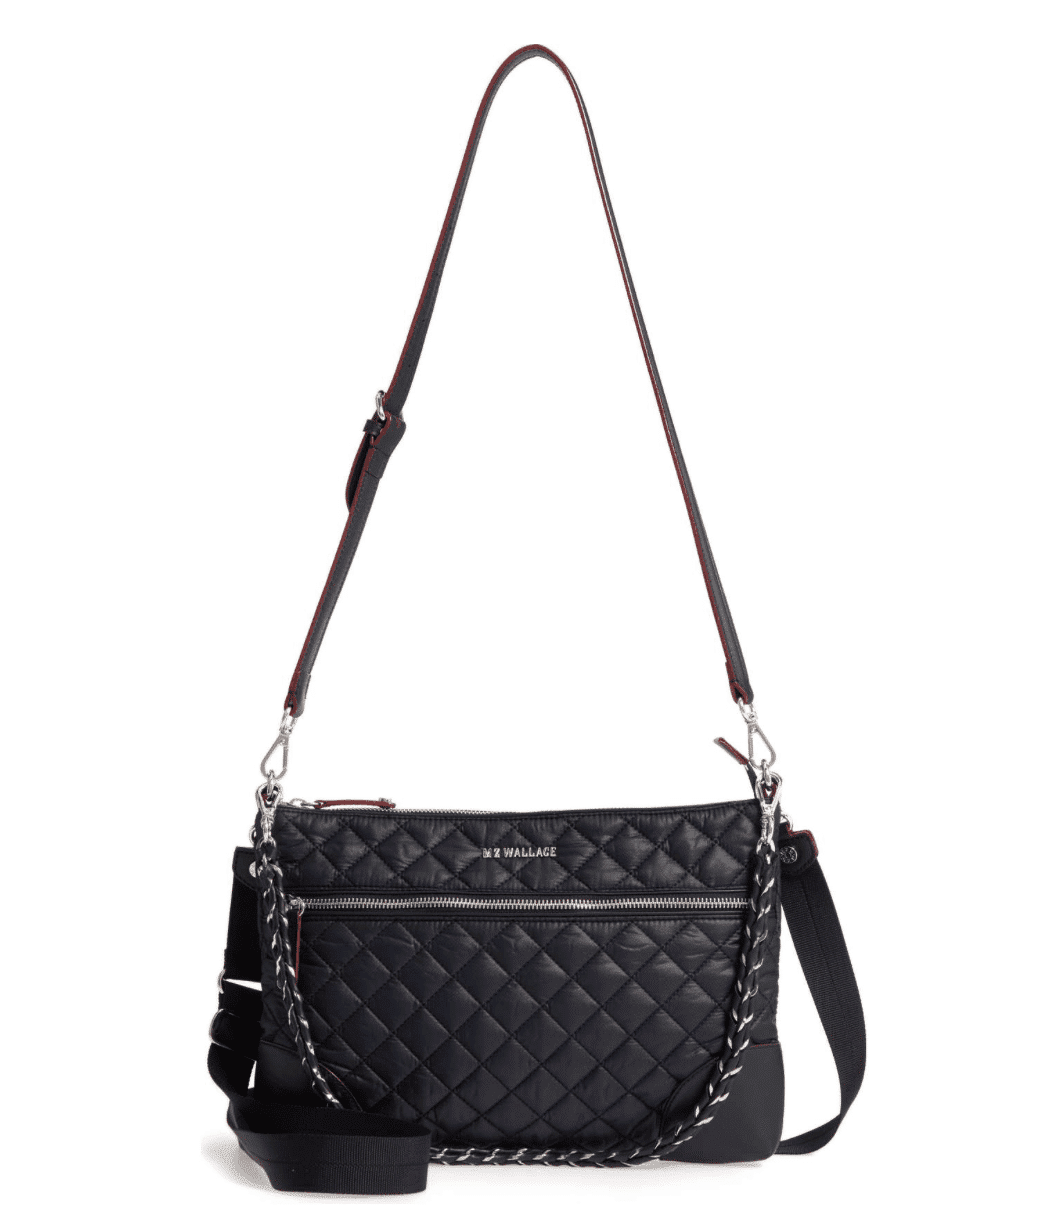 Carmen Yuen on LinkedIn: Our Crissy Crossbody was just named the best Anti-theft  Travel bag by…